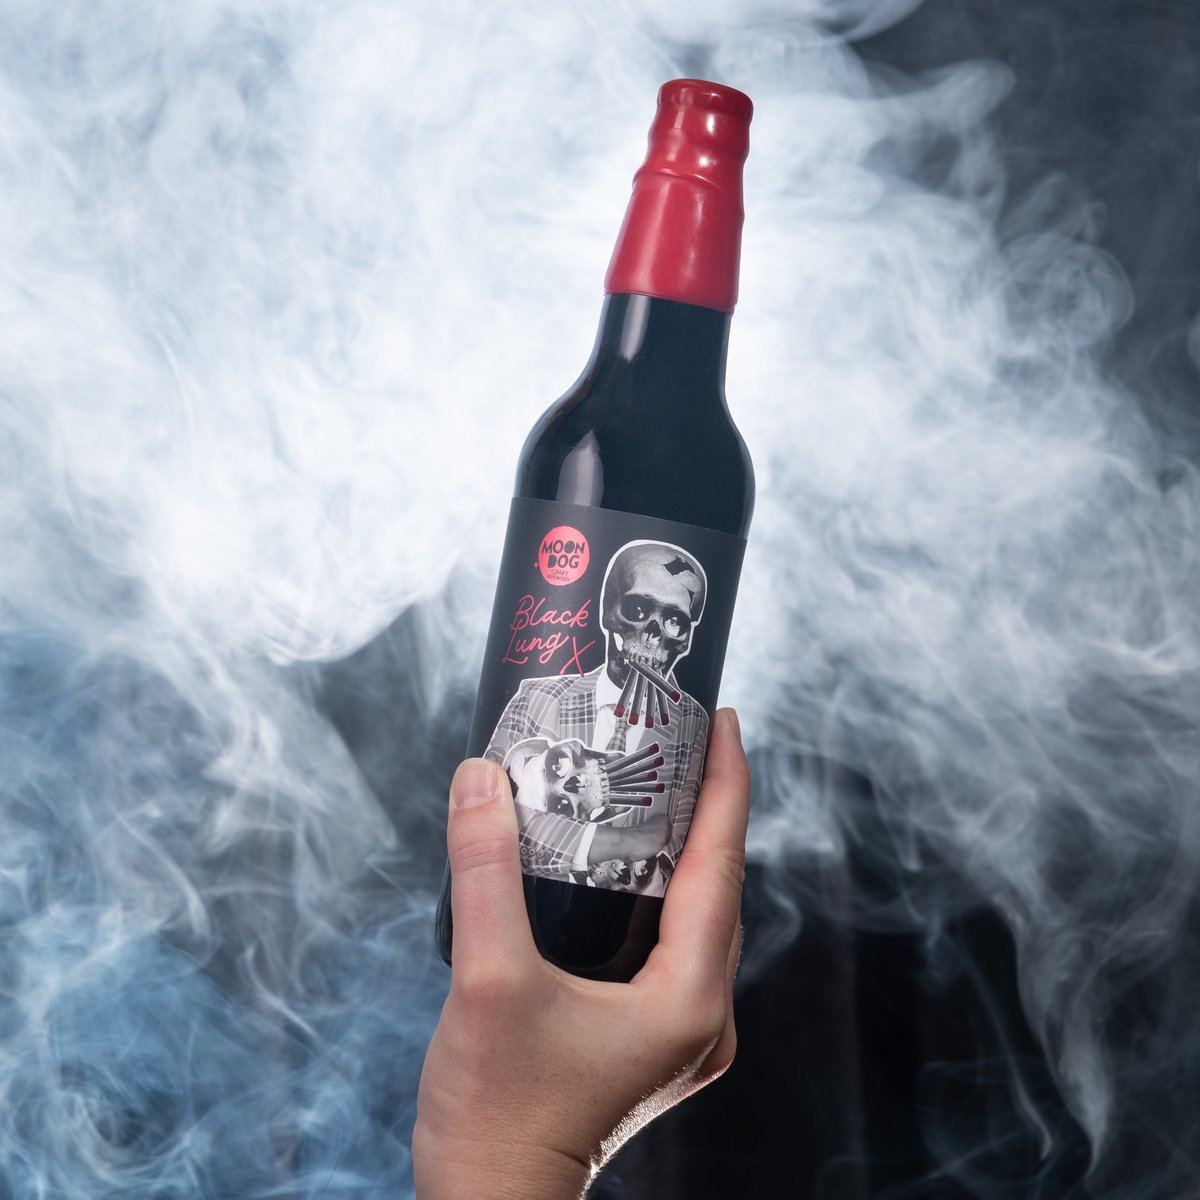 NEW BEER: @moondogbrewing's tenth Black Lung spent months sucking the juice out of barrels from one of Scotland's most iconic whisky distilleries. The result is an intense – and rather large – peaty, smoky, chocolaty beast of a beer. craftypint.com/beer/7680/moon…